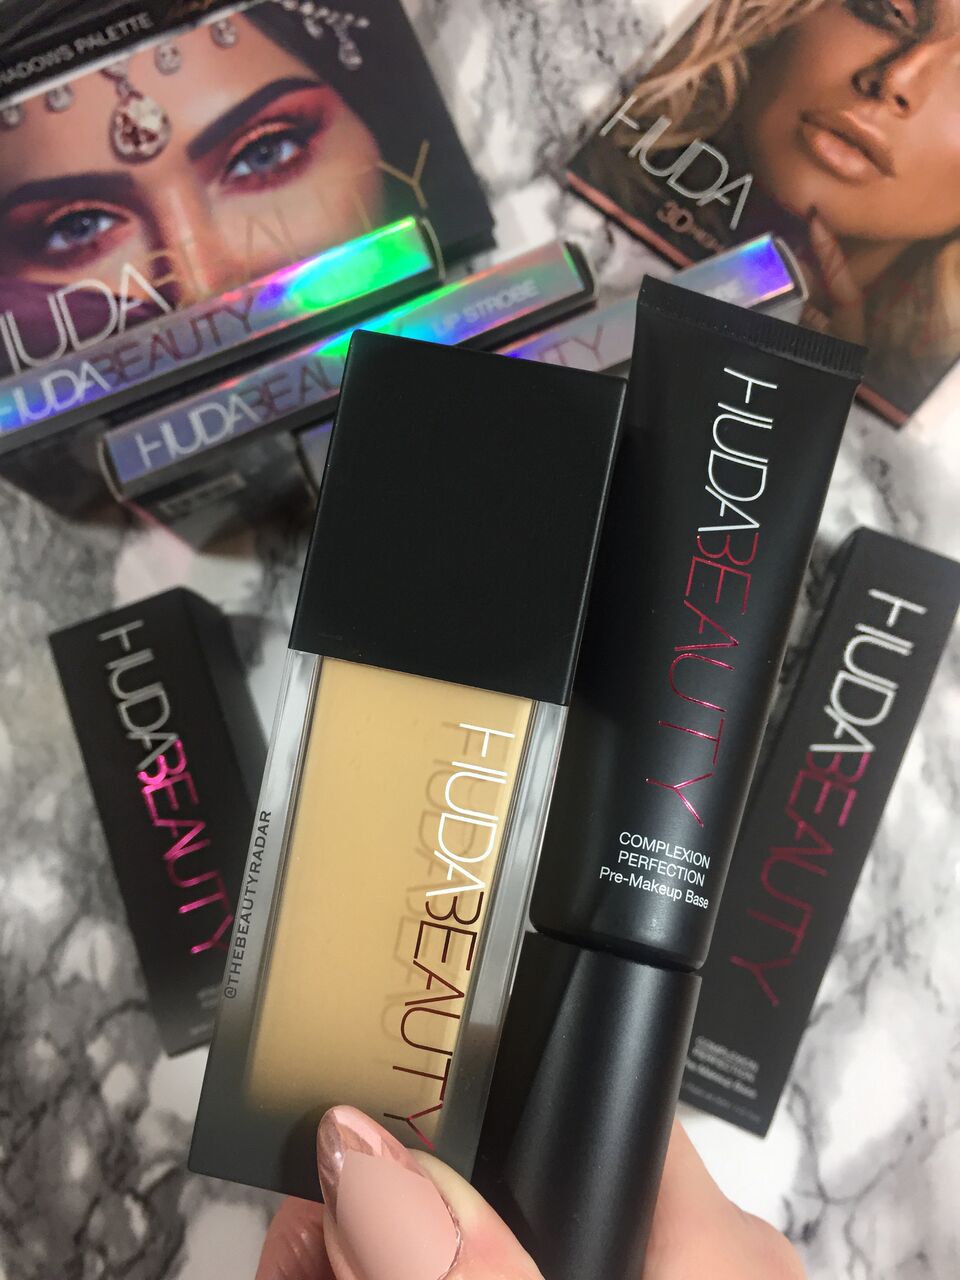 Huda Beauty Faux Filter Foundation: Is it the real life "filter" been looking for? — Beauty Radar